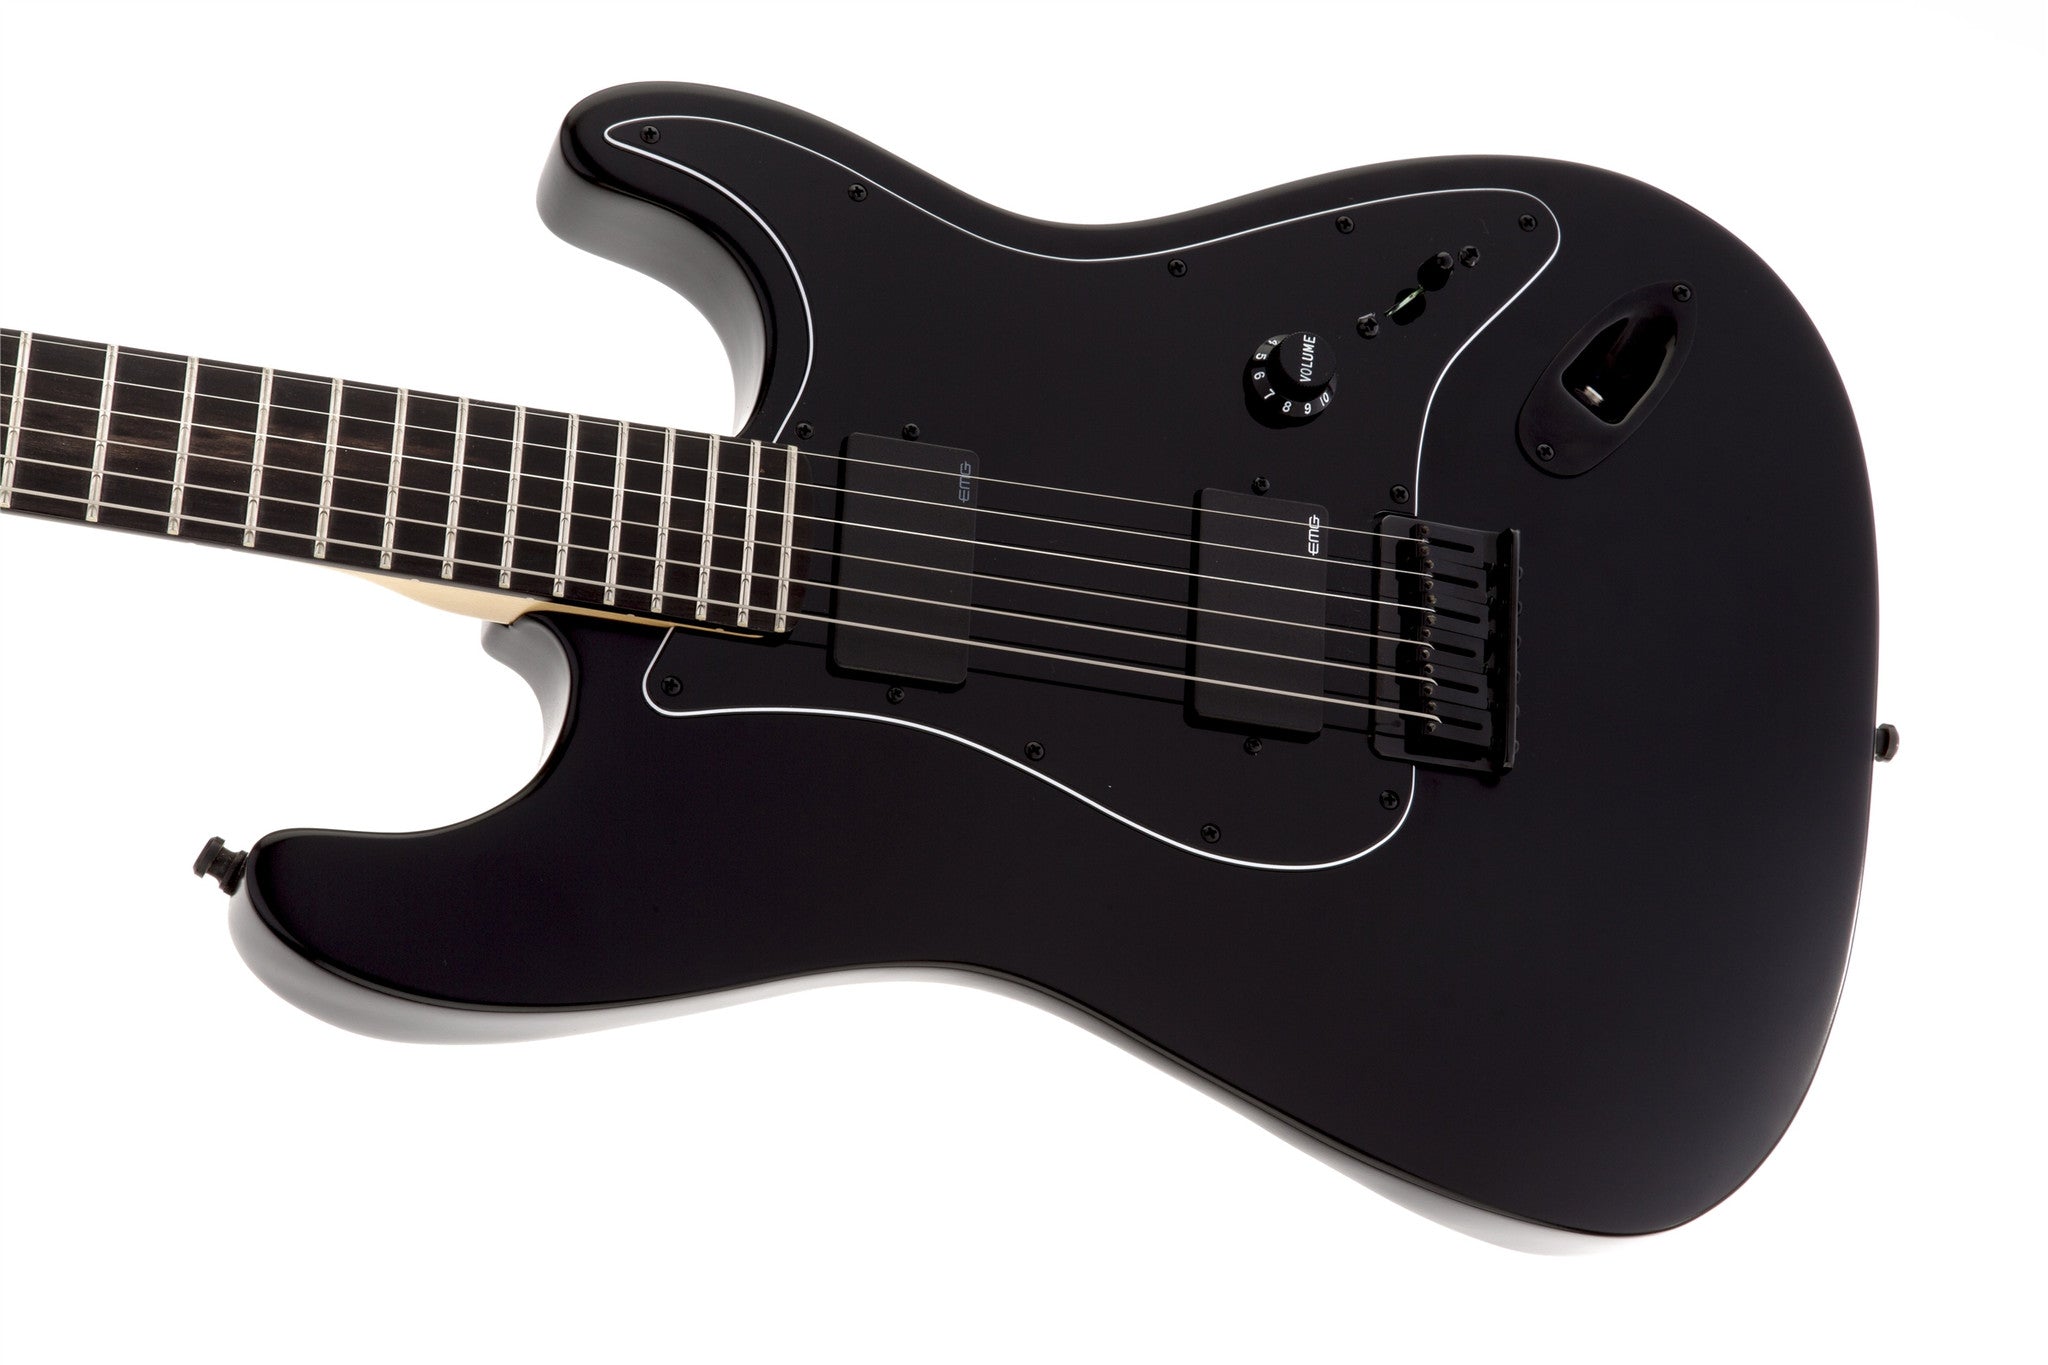 Fender Jim Root Stratocaster®, Ebony Fingerboard, Flat Black 0114545706 - L.A. Music - Canada's Favourite Music Store!